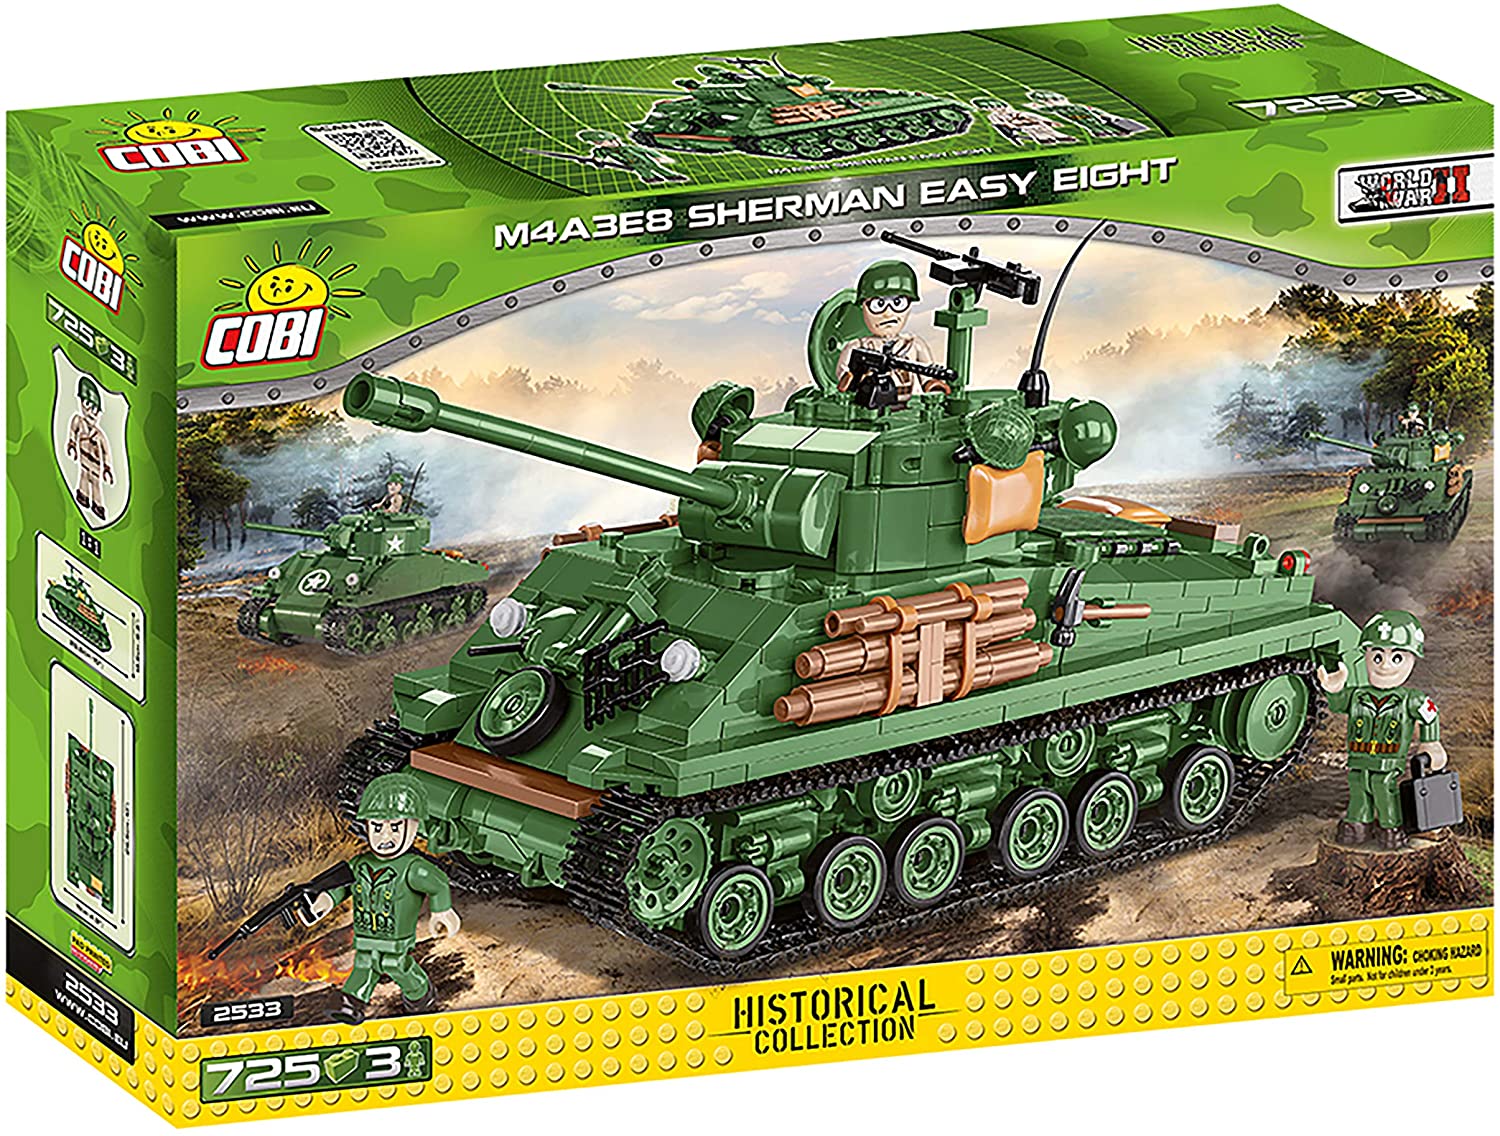 Small Army M4A3E8 Sherman "Easy Eight" Tank